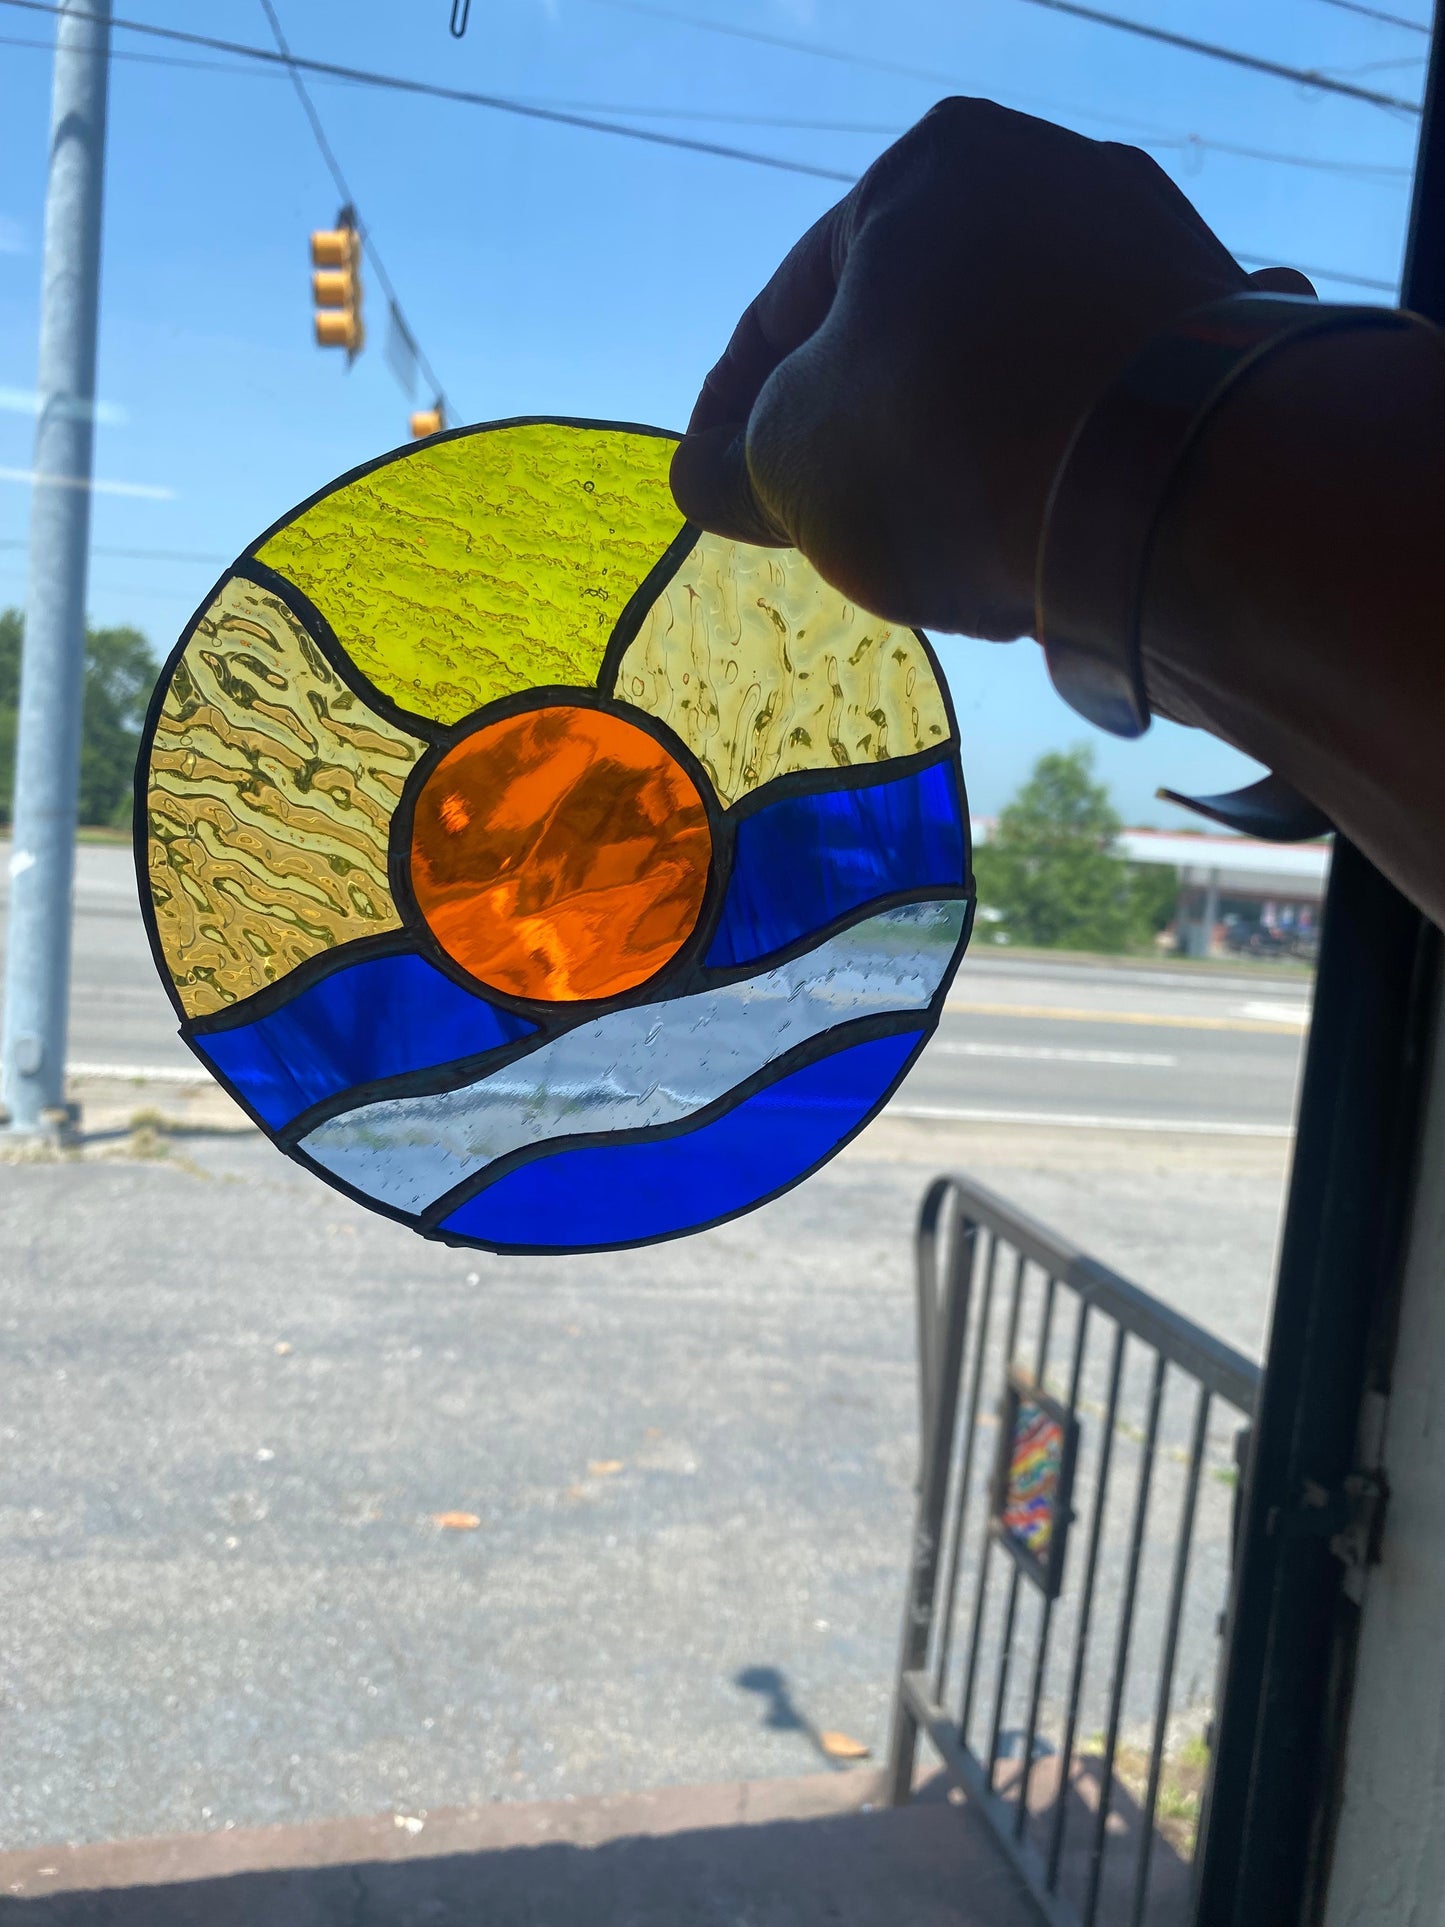 Beginner Stained Glass class, May 9,4-6:00 pm